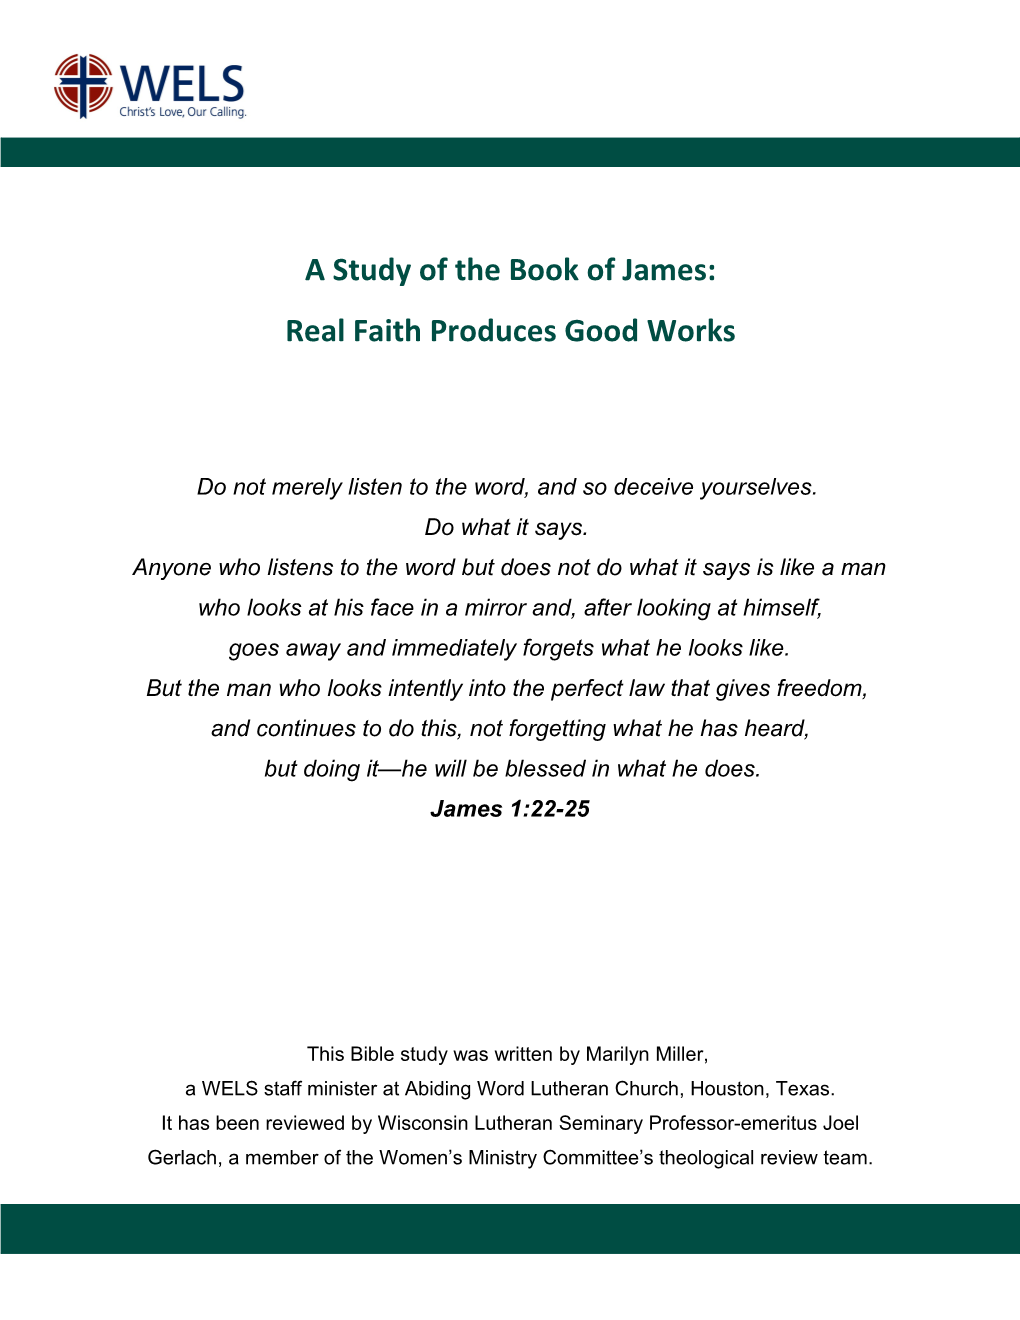 A Study of the Book of James: Real Faith Produces Good Works